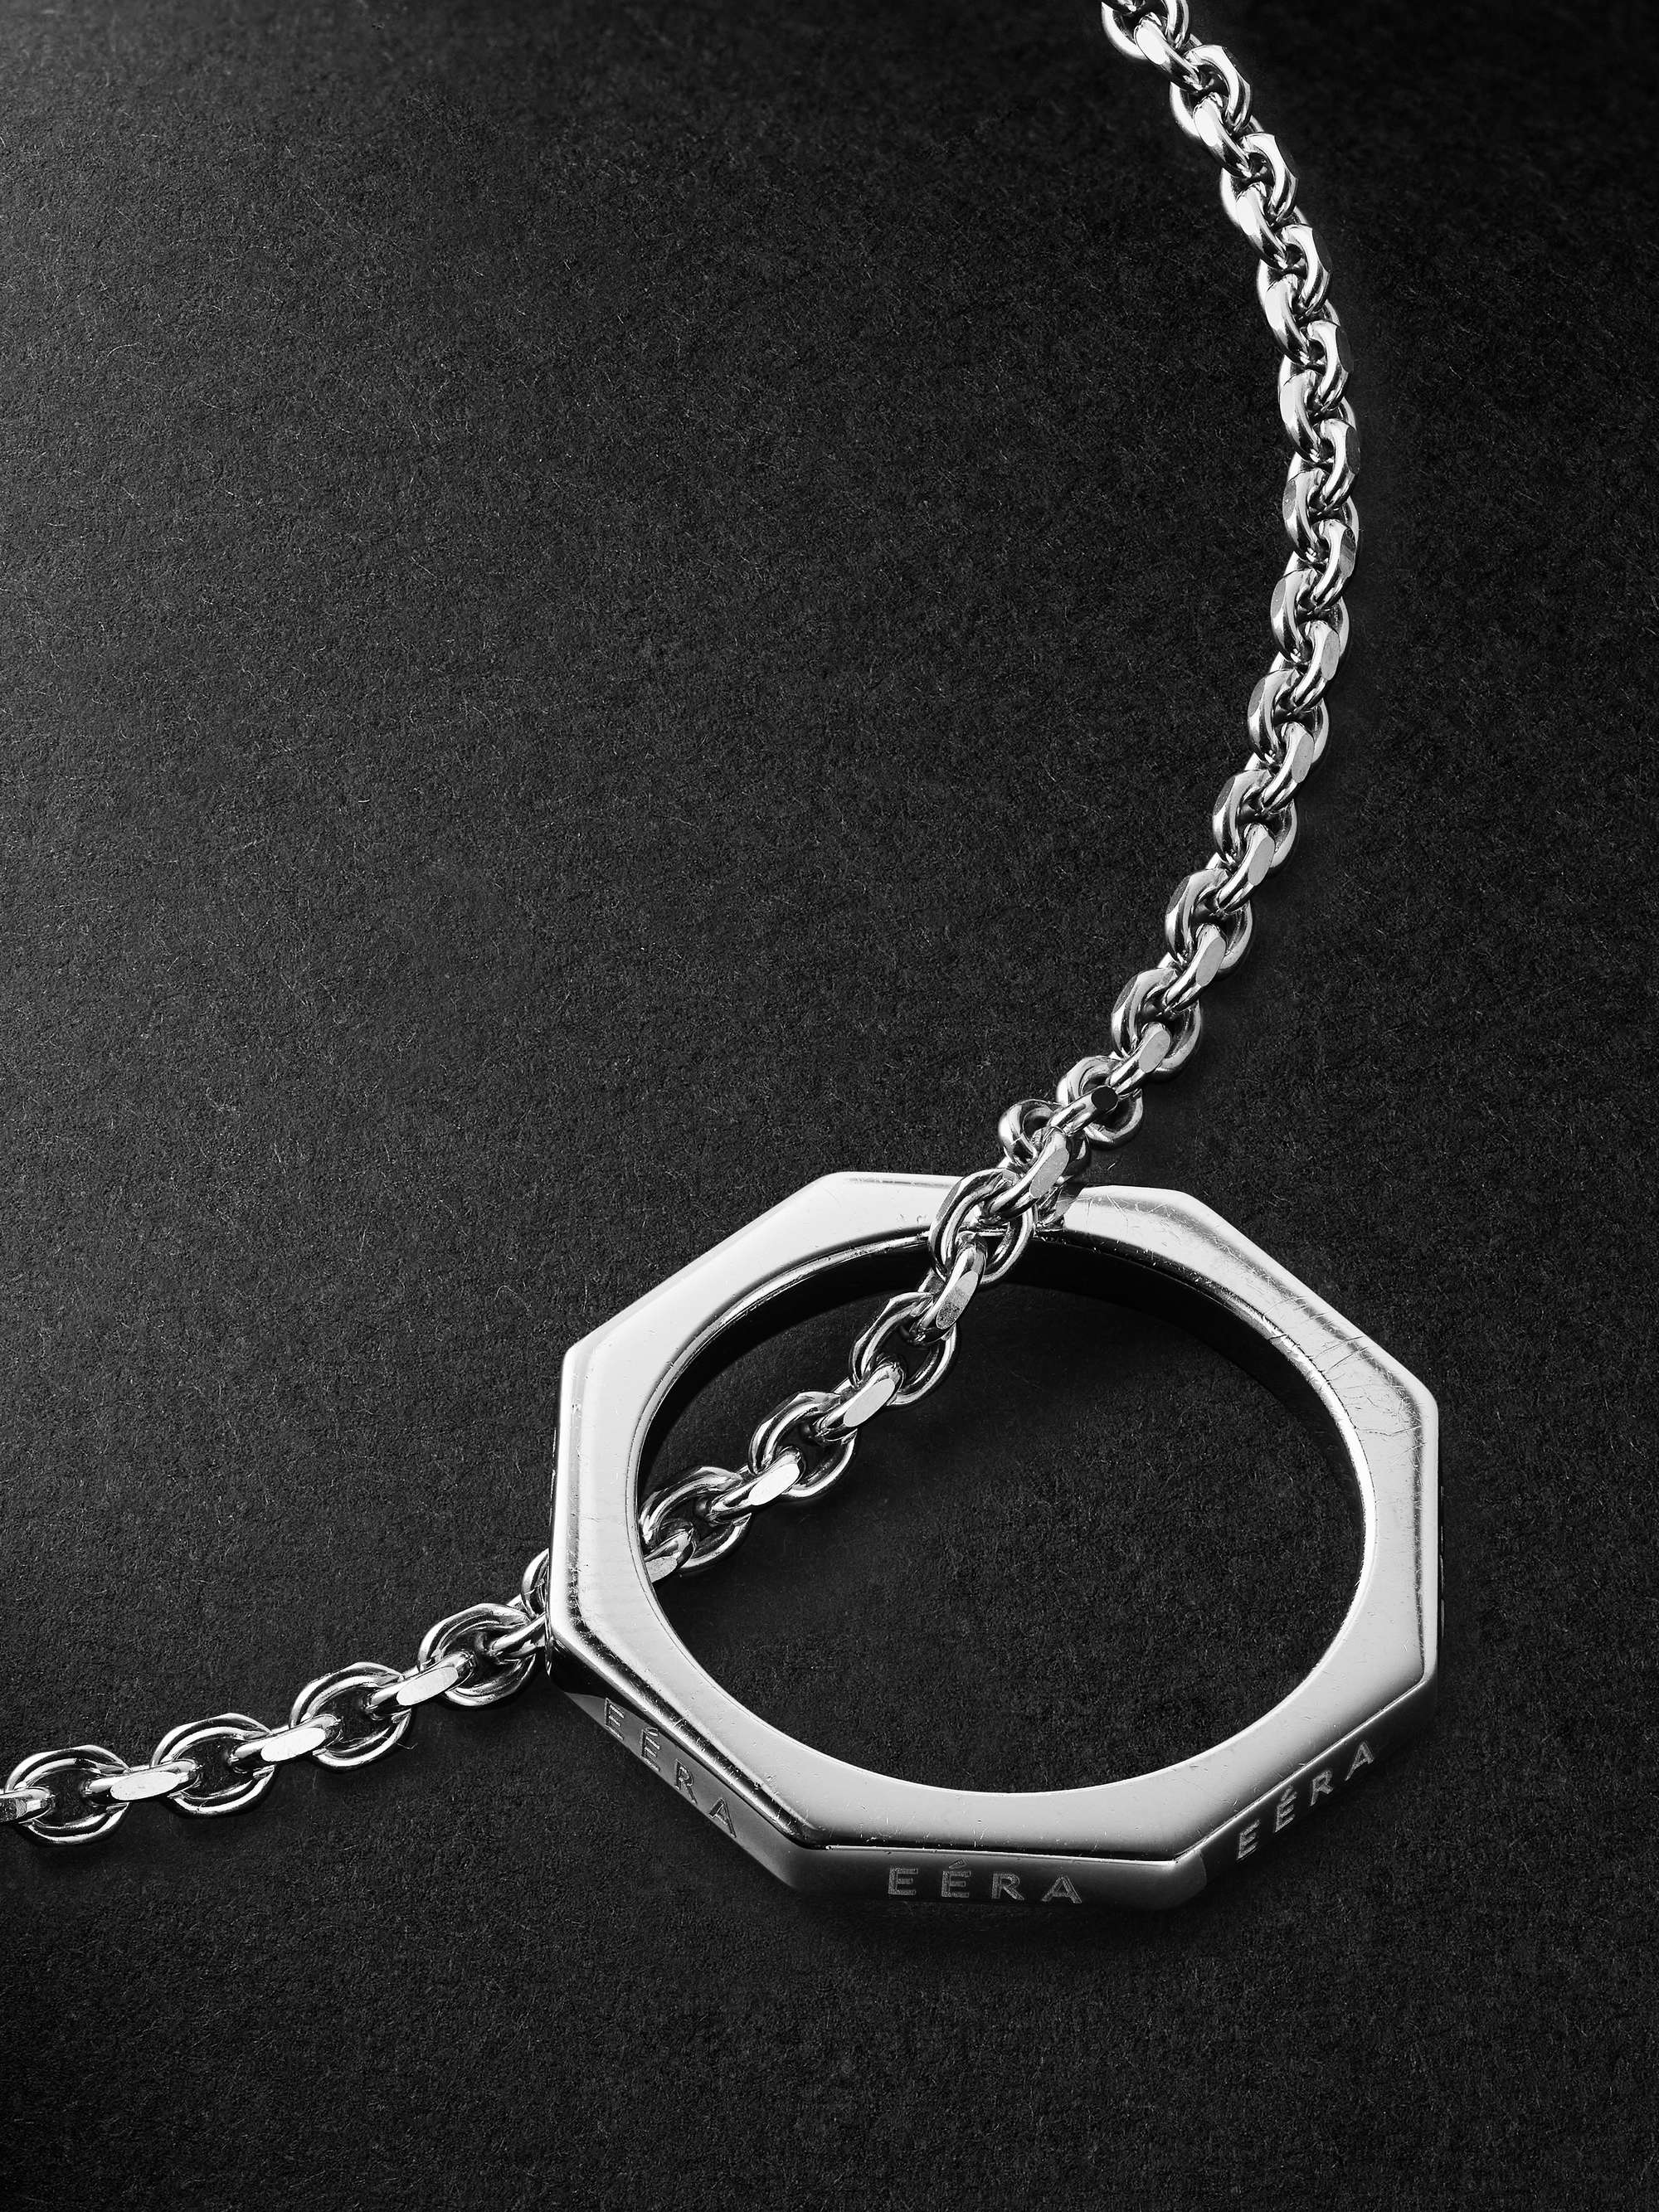 EÉRA White Gold Chain Necklace